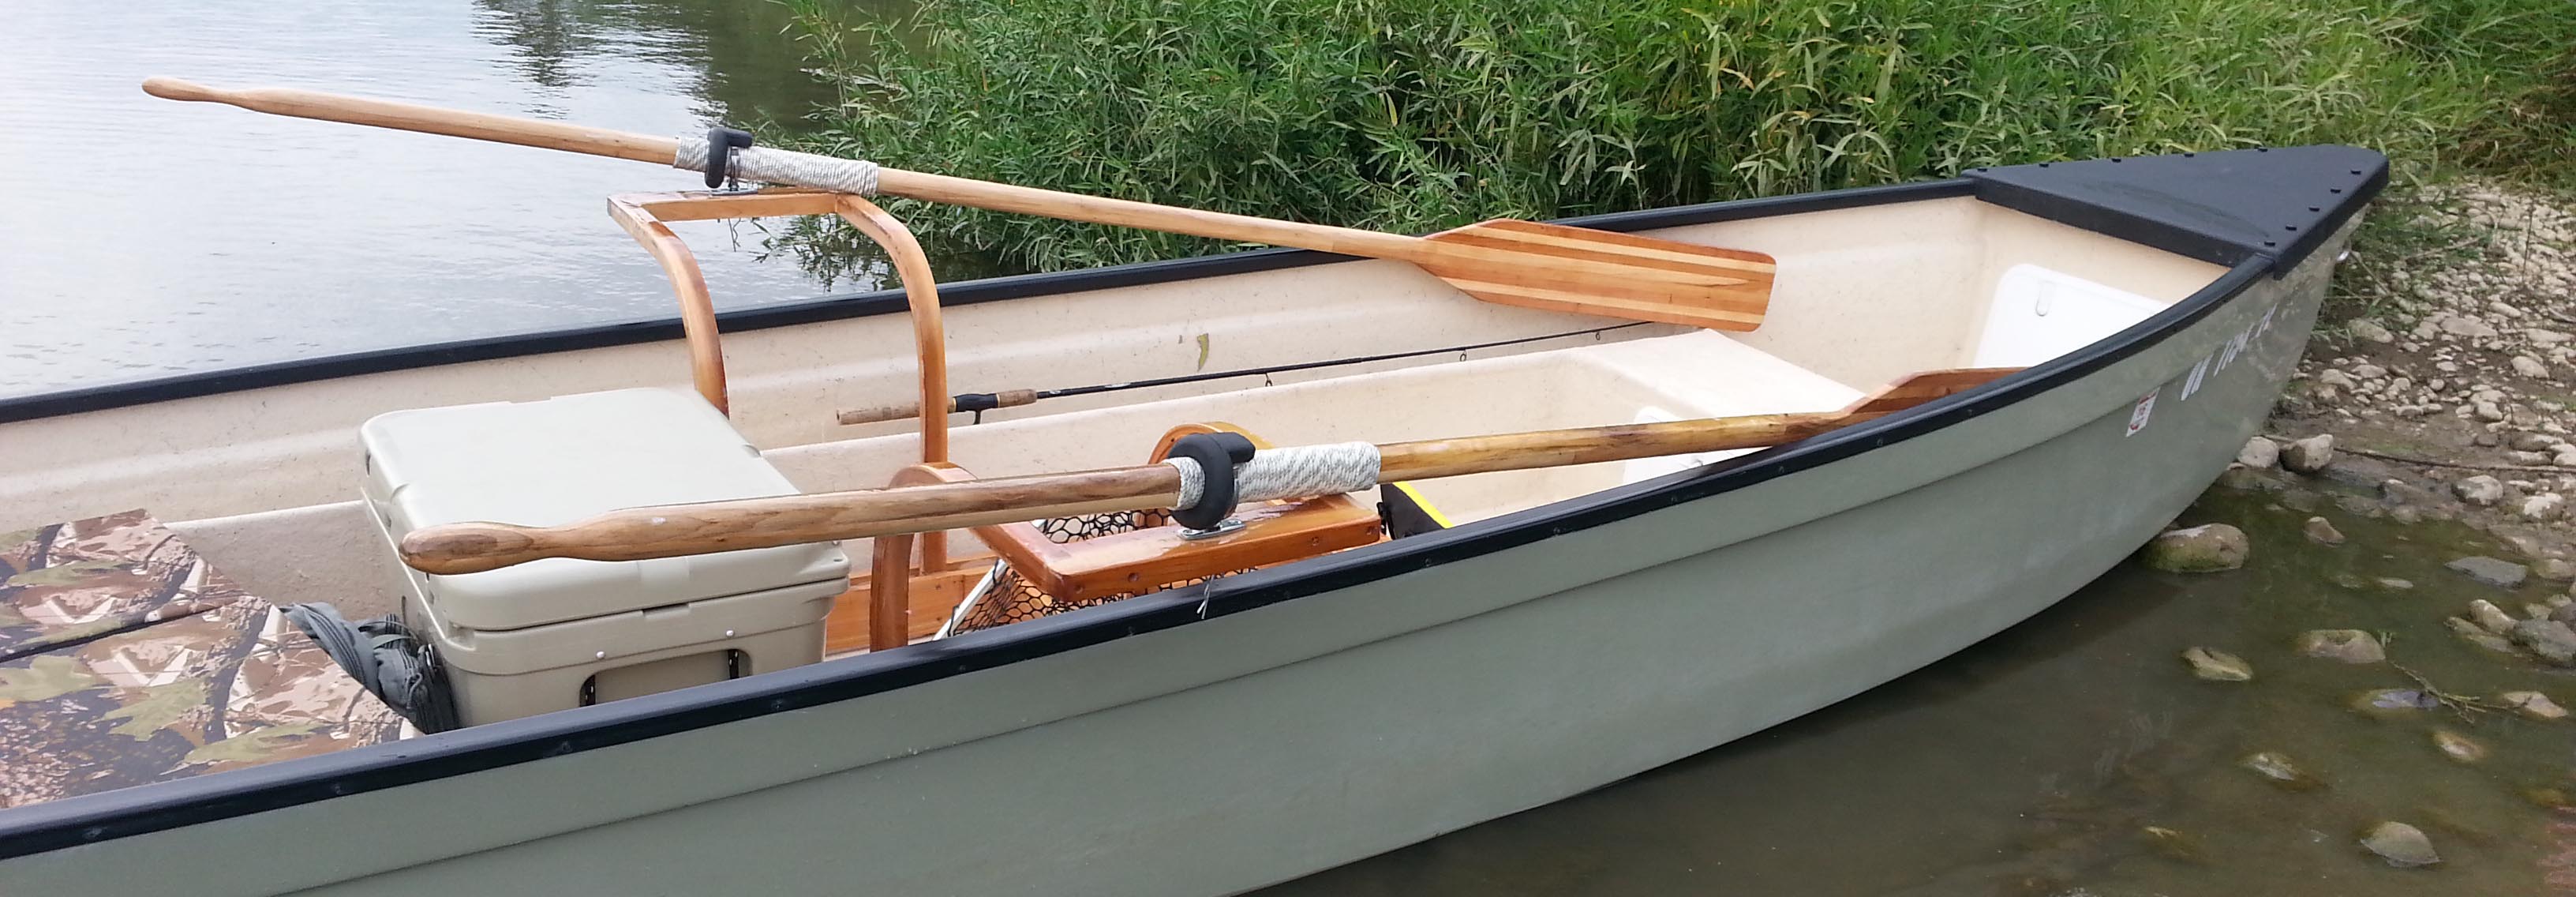 Towee Boats – The Fiddle and Creel